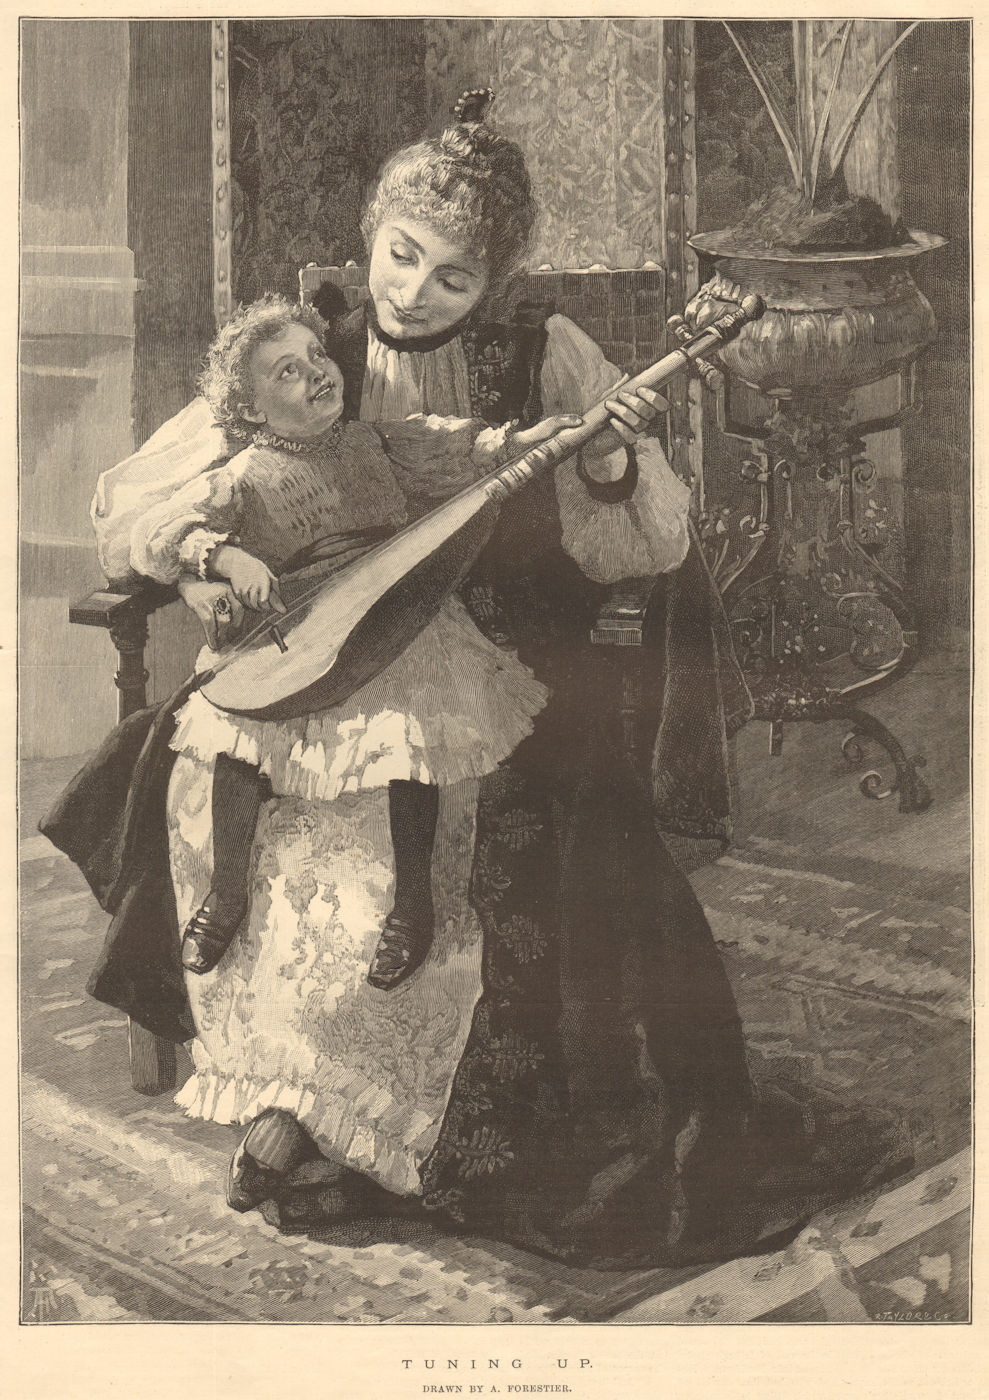 Associate Product Tuning up. Drawn by A. Forestier. Music. Family 1891 antique ILN full page